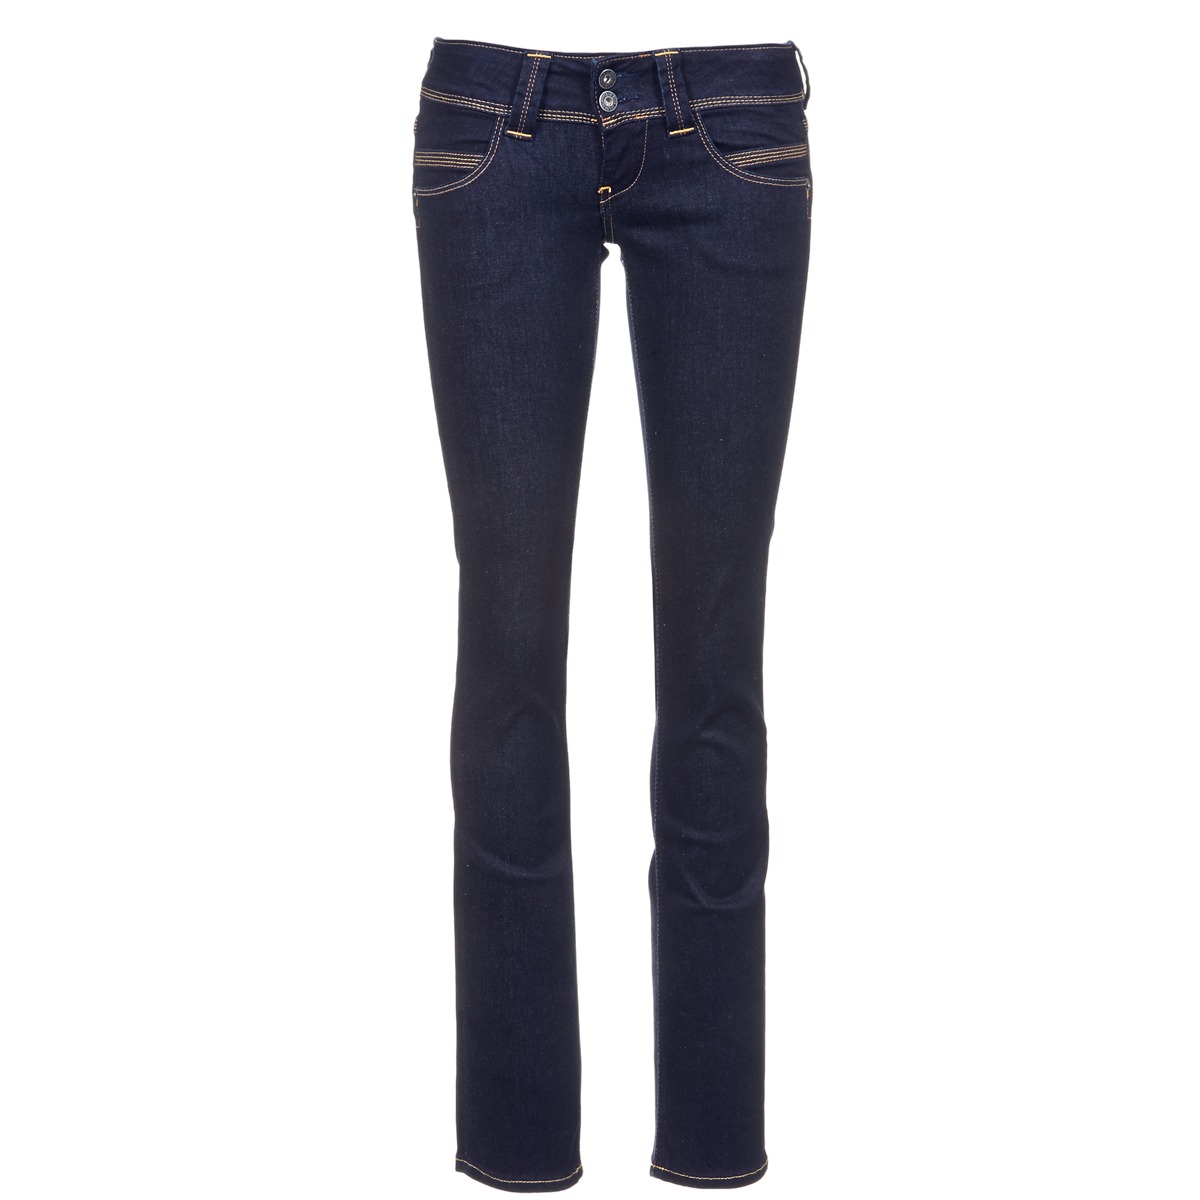 / - Free jeans NET delivery straight | VENUS - M15 Blue Spartoo Women jeans Clothing ! Pepe